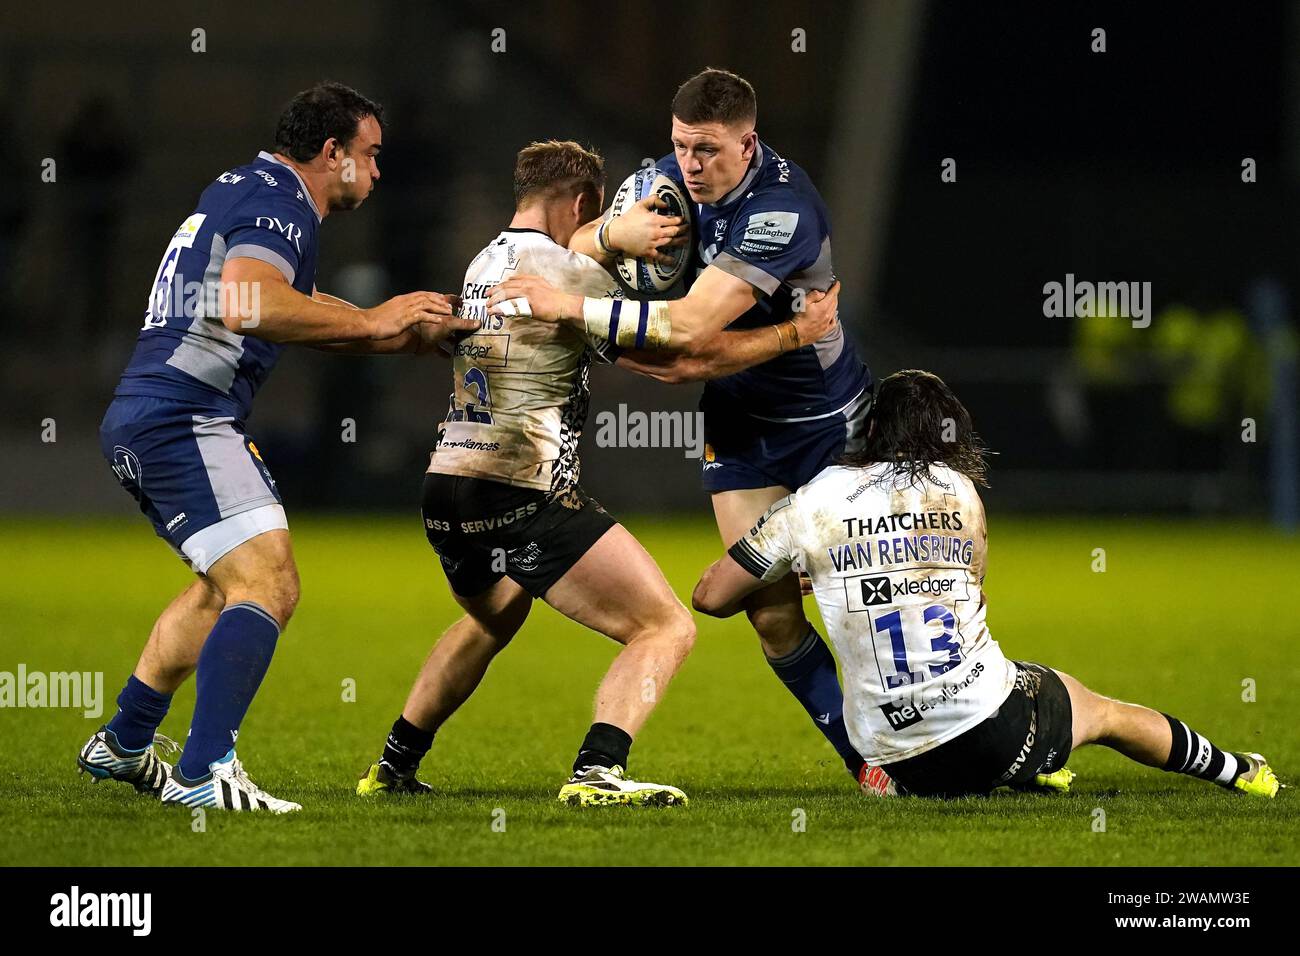 Sale sharks' sam james is tackled by bristol bears' james williams and johannes  janse van rensburg (right) during the gallagher premiership match at the aj  bell stadium, salford. picture date: friday january